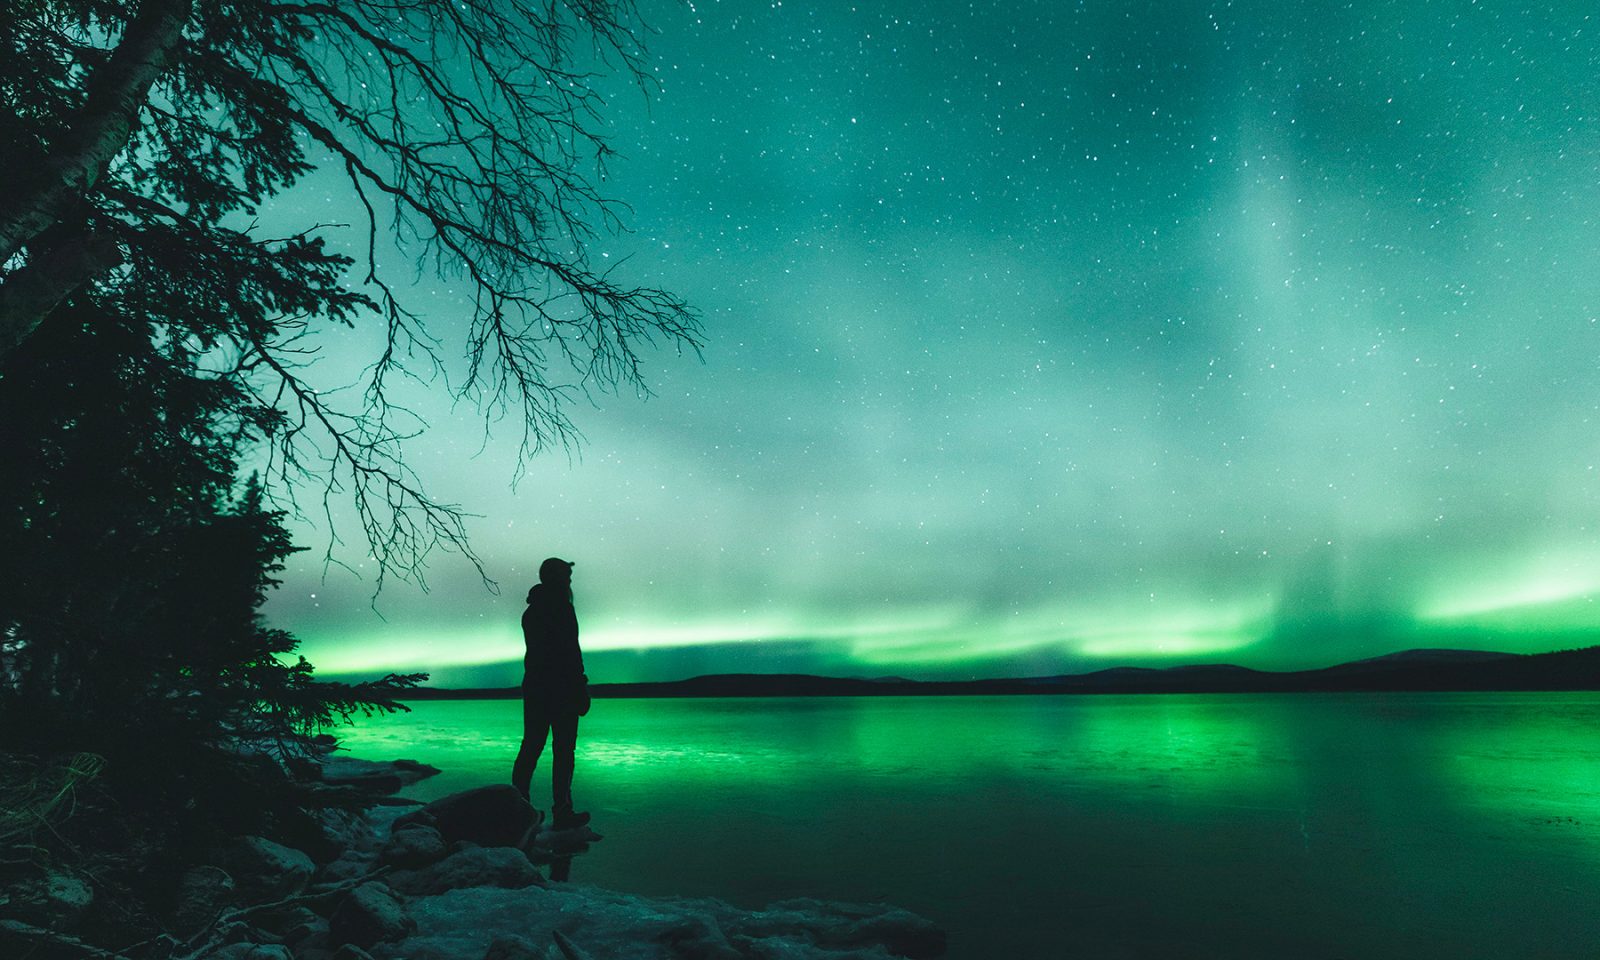 Northern lights reflecting from the surface of the lake. | Lapland Luxury